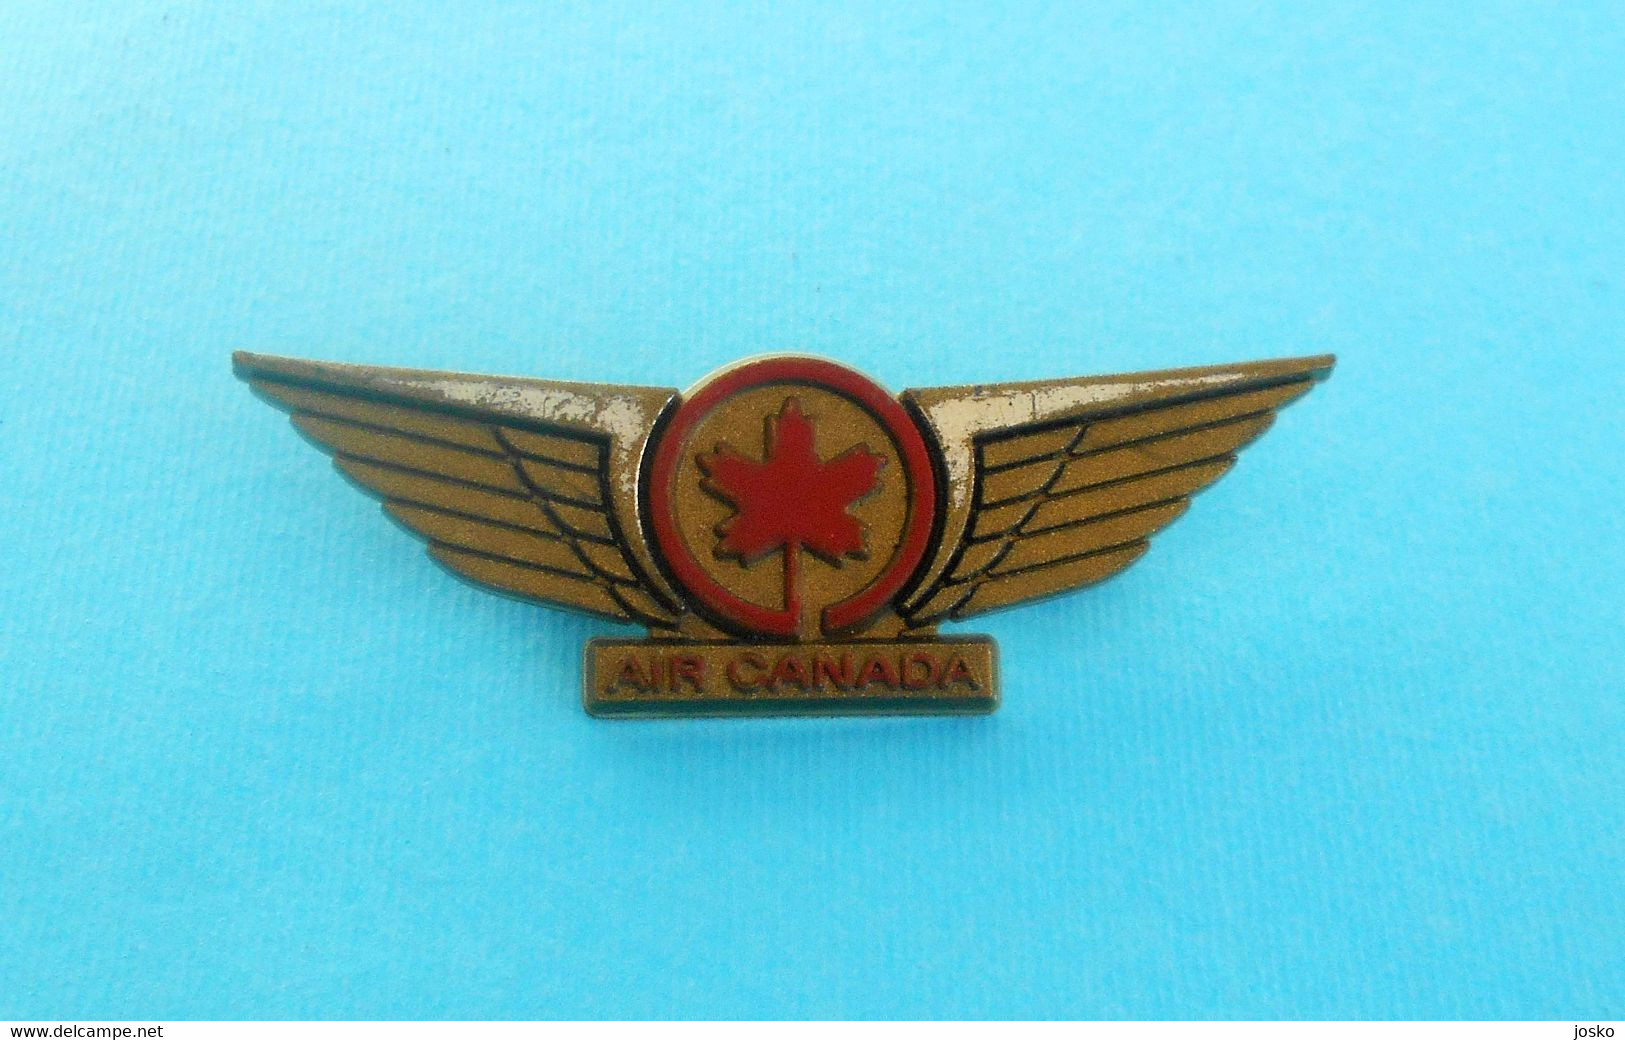 AIR CANADA ... Vintage Pilot Wings Badge * Canada National Airlines * Airways Airline Air Company Pilote Plane Avion - Distintivi Equipaggio